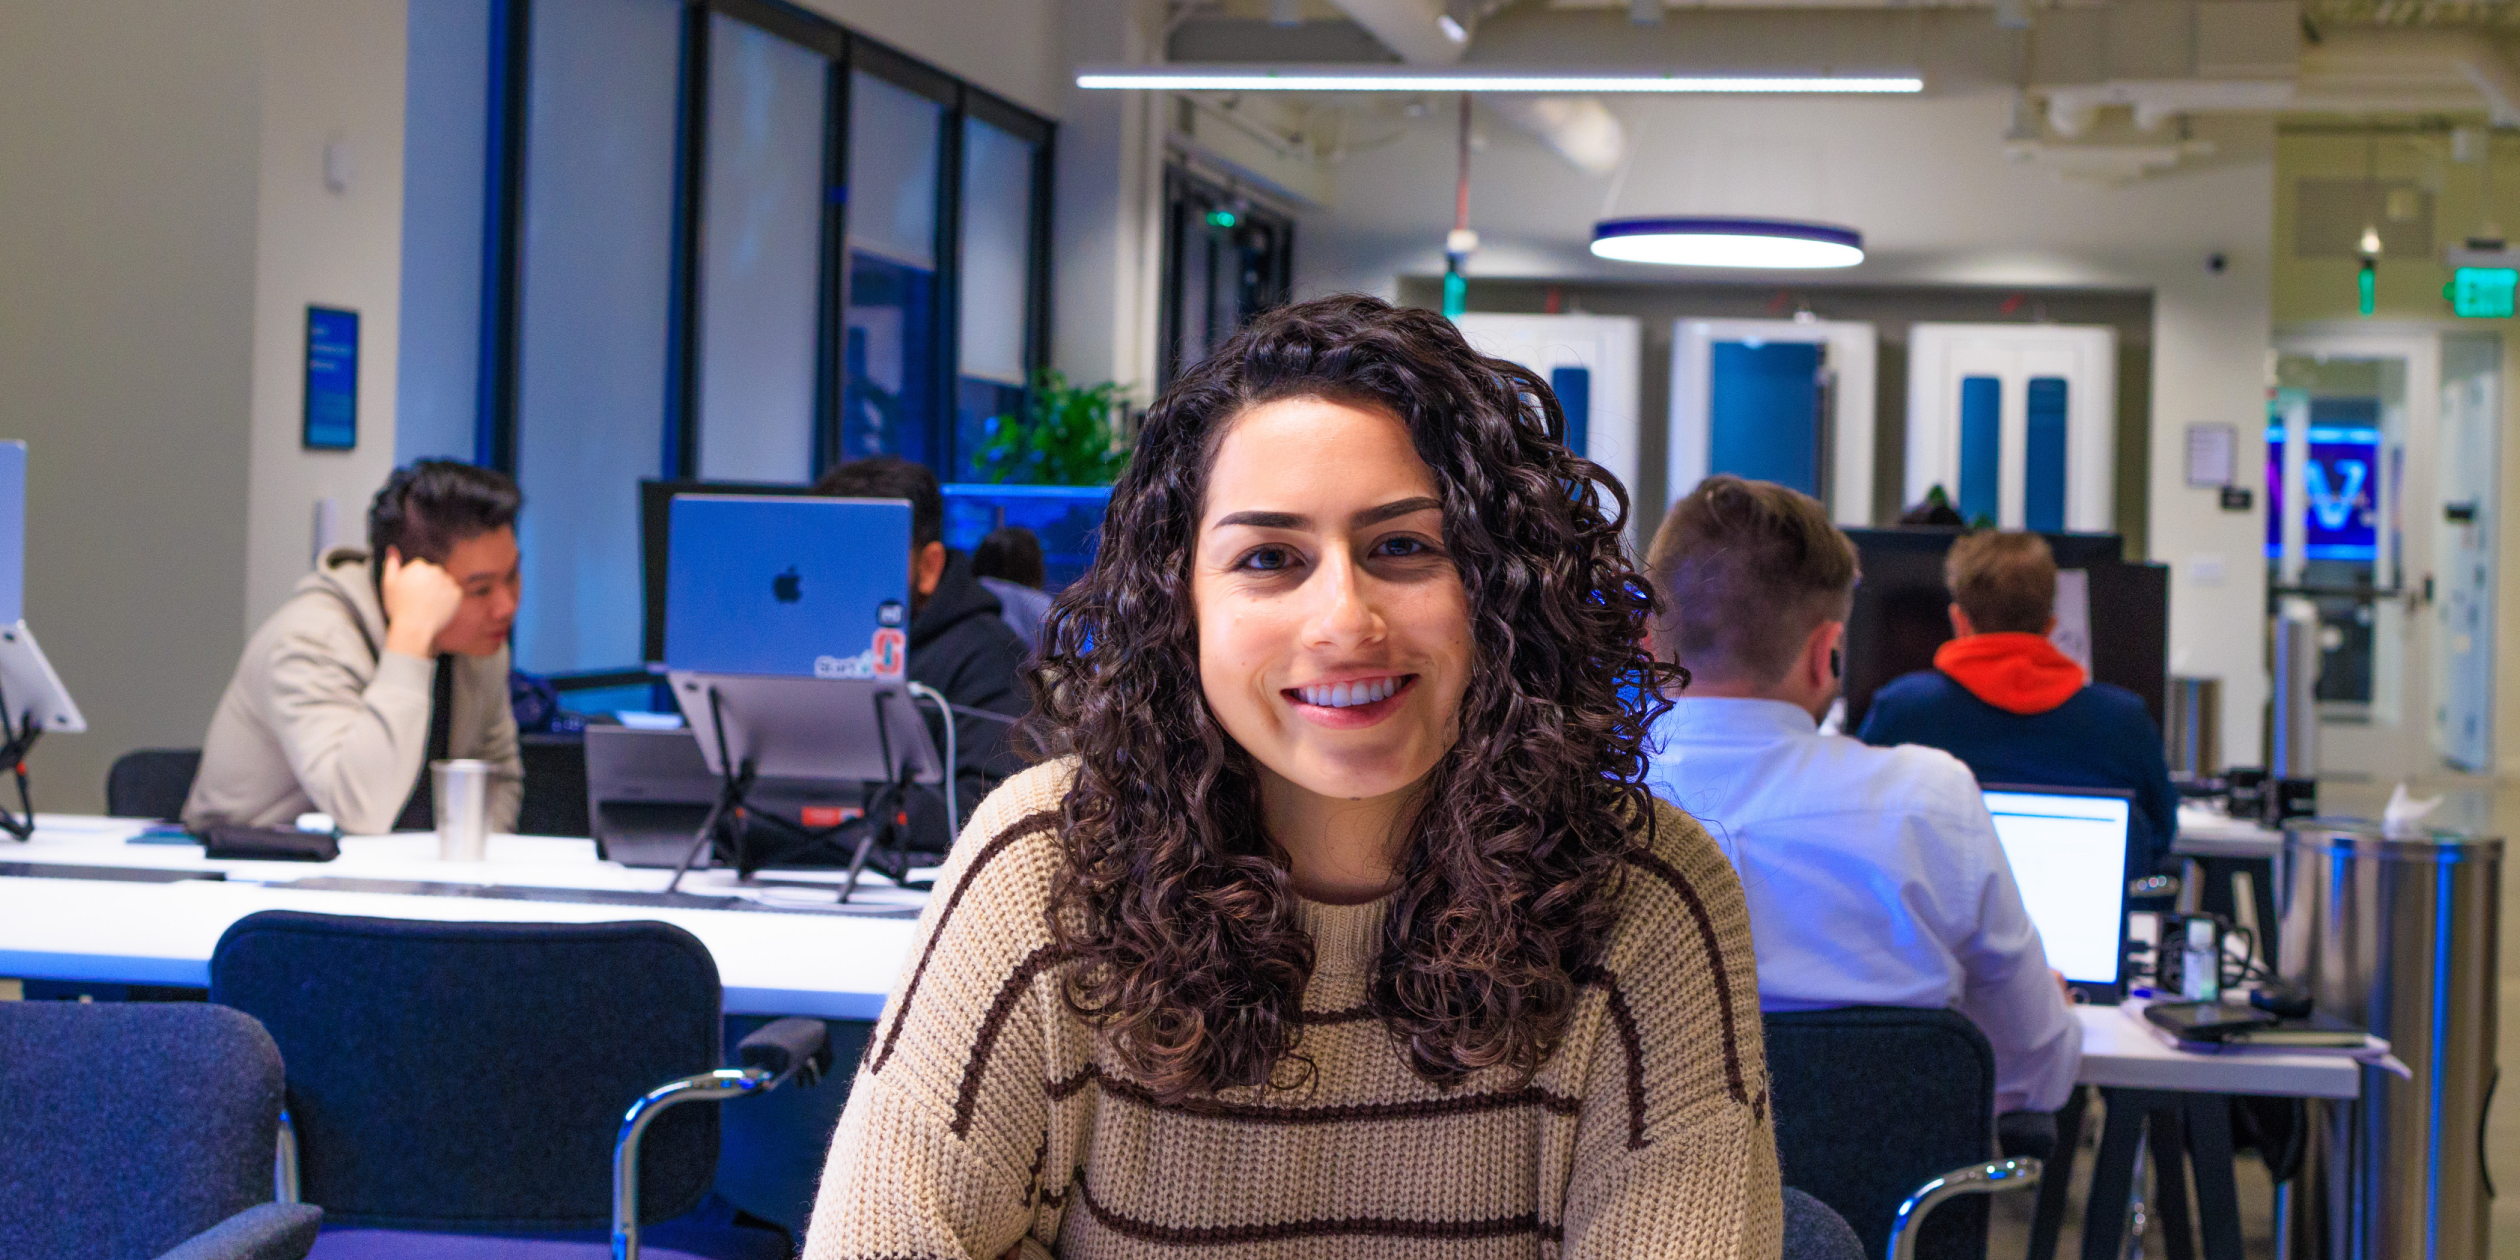 A woman with curly hair smiling at the camera, seated in a vibrant office environment where colleagues can be seen engaged at their workstations, exemplifying Samespace’s dynamic and passionate work culture.